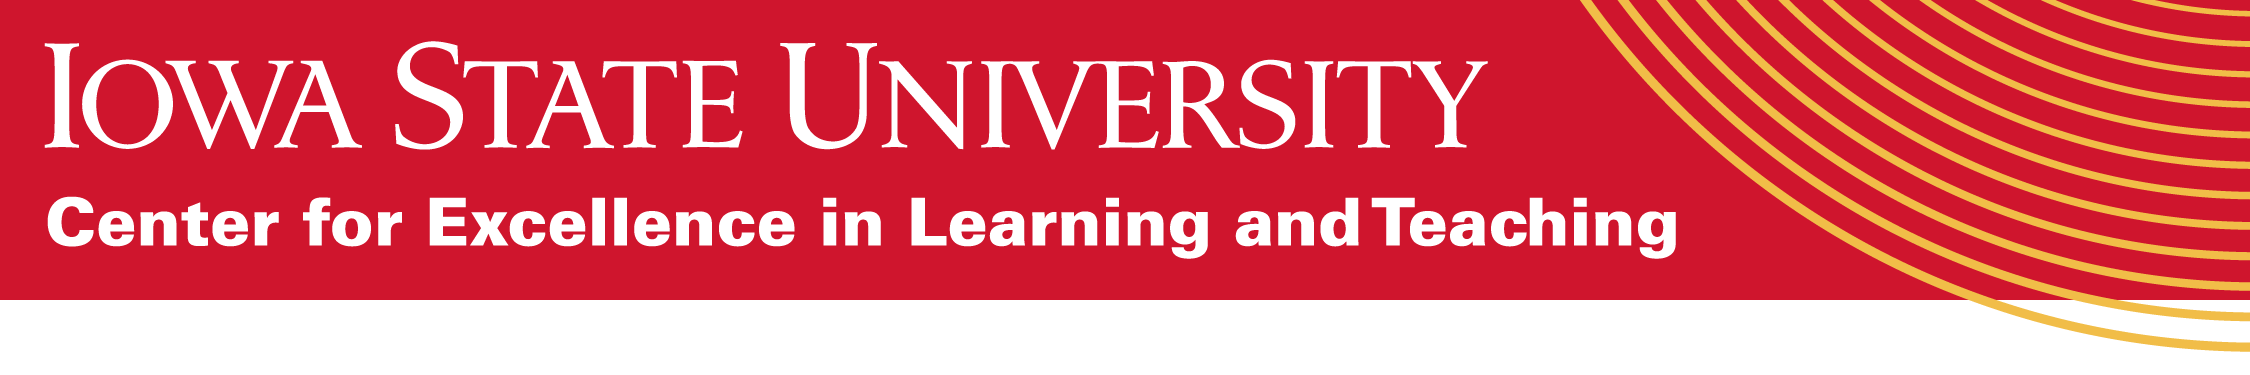 Iowa State University Center for Excellence in Learning and Teaching